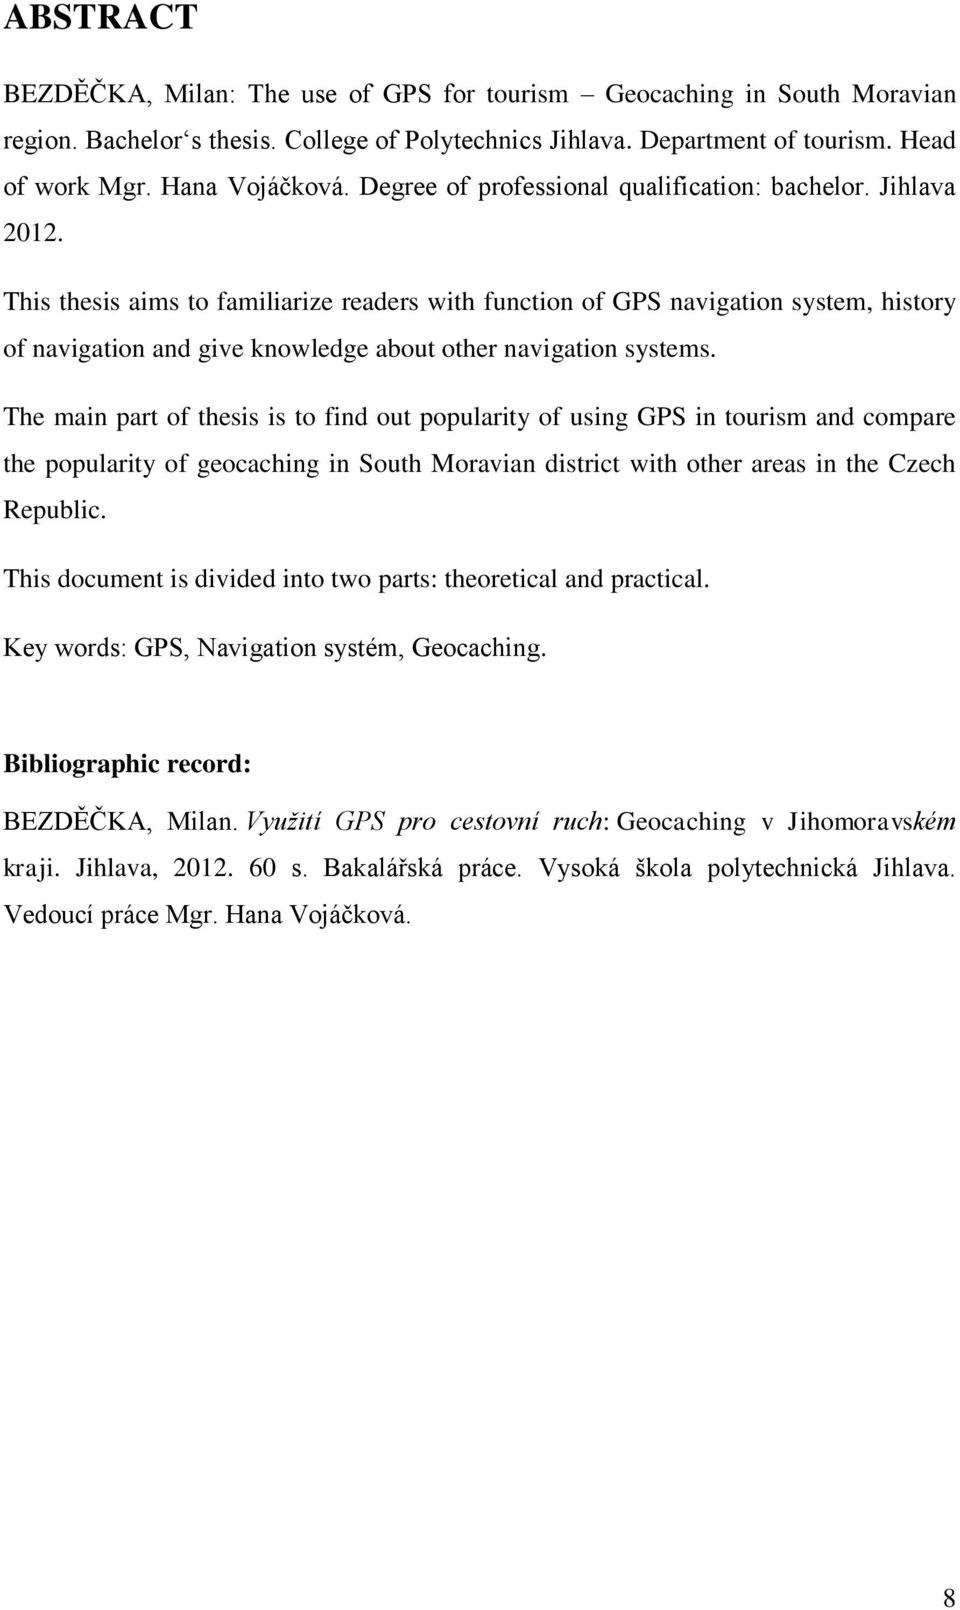 This thesis aims to familiarize readers with function of GPS navigation system, history of navigation and give knowledge about other navigation systems.